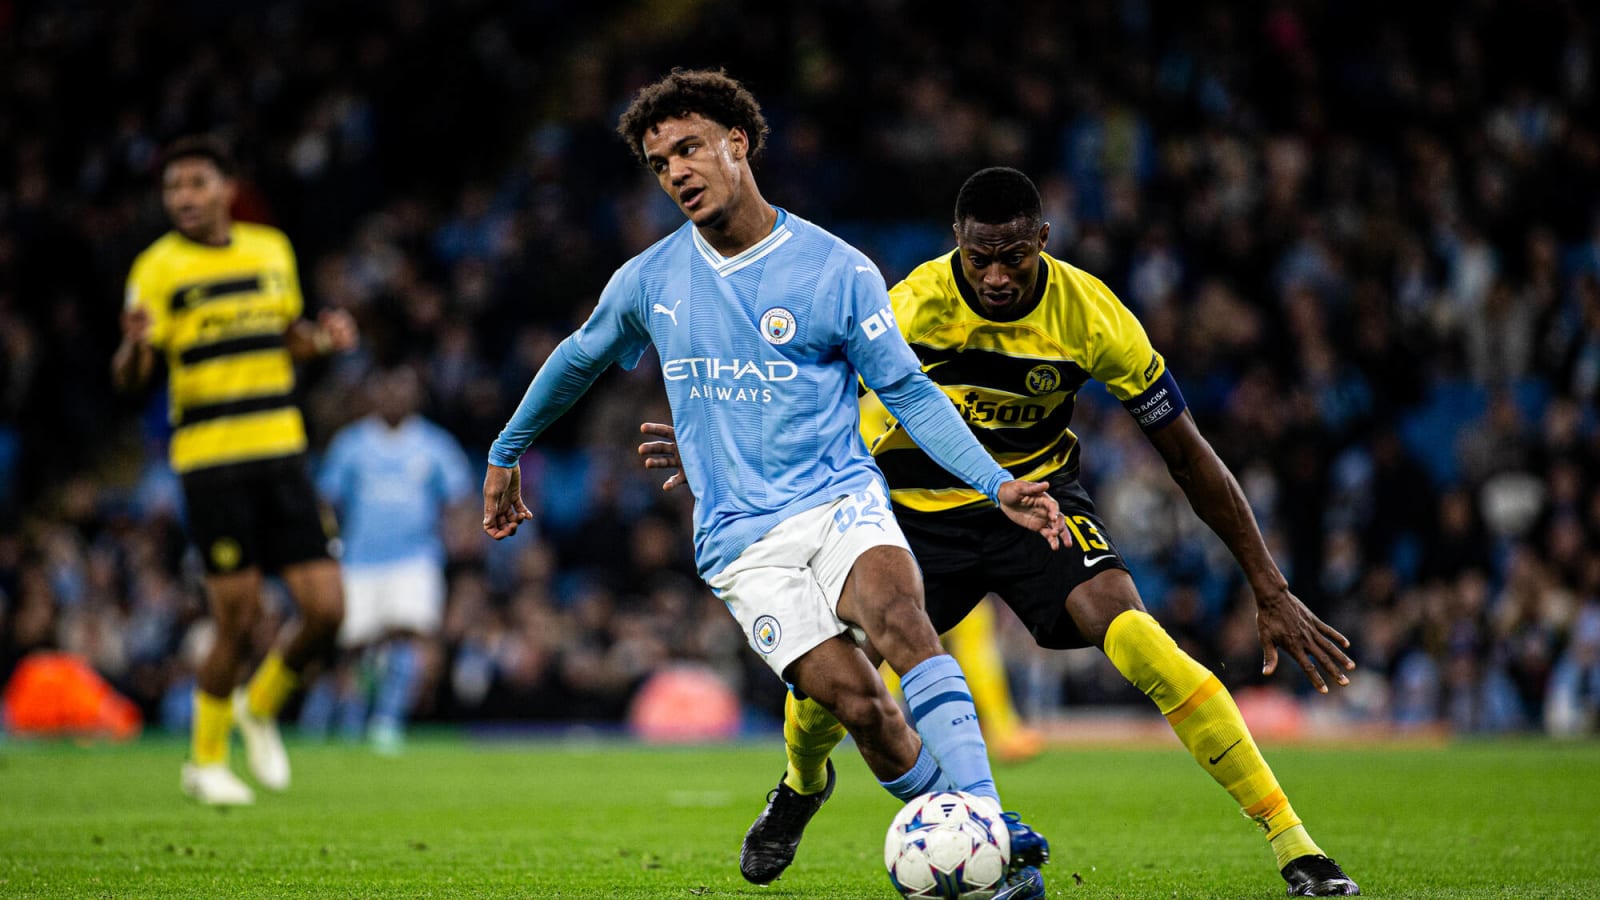 Oscar Bobb is determined to make it at Manchester City